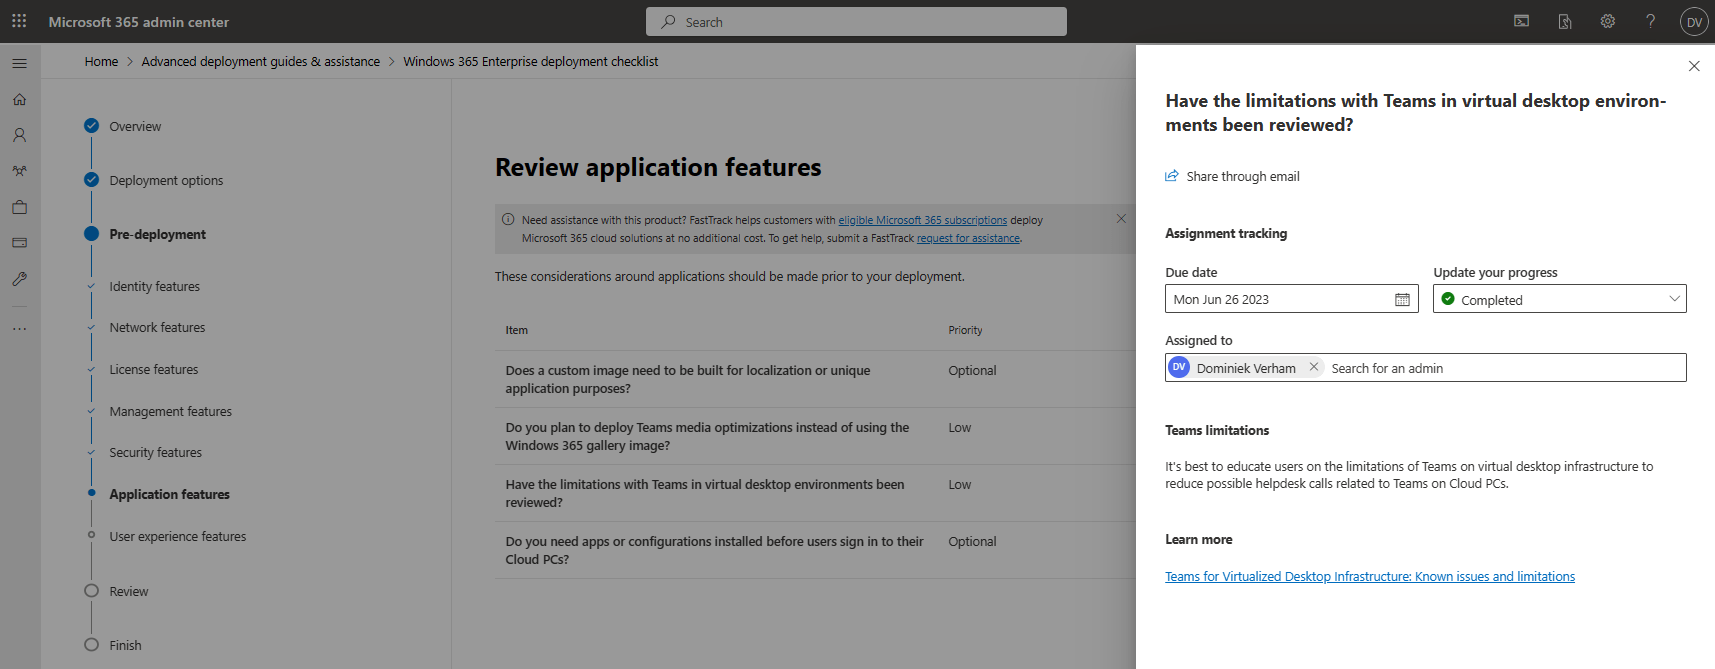 Application Features